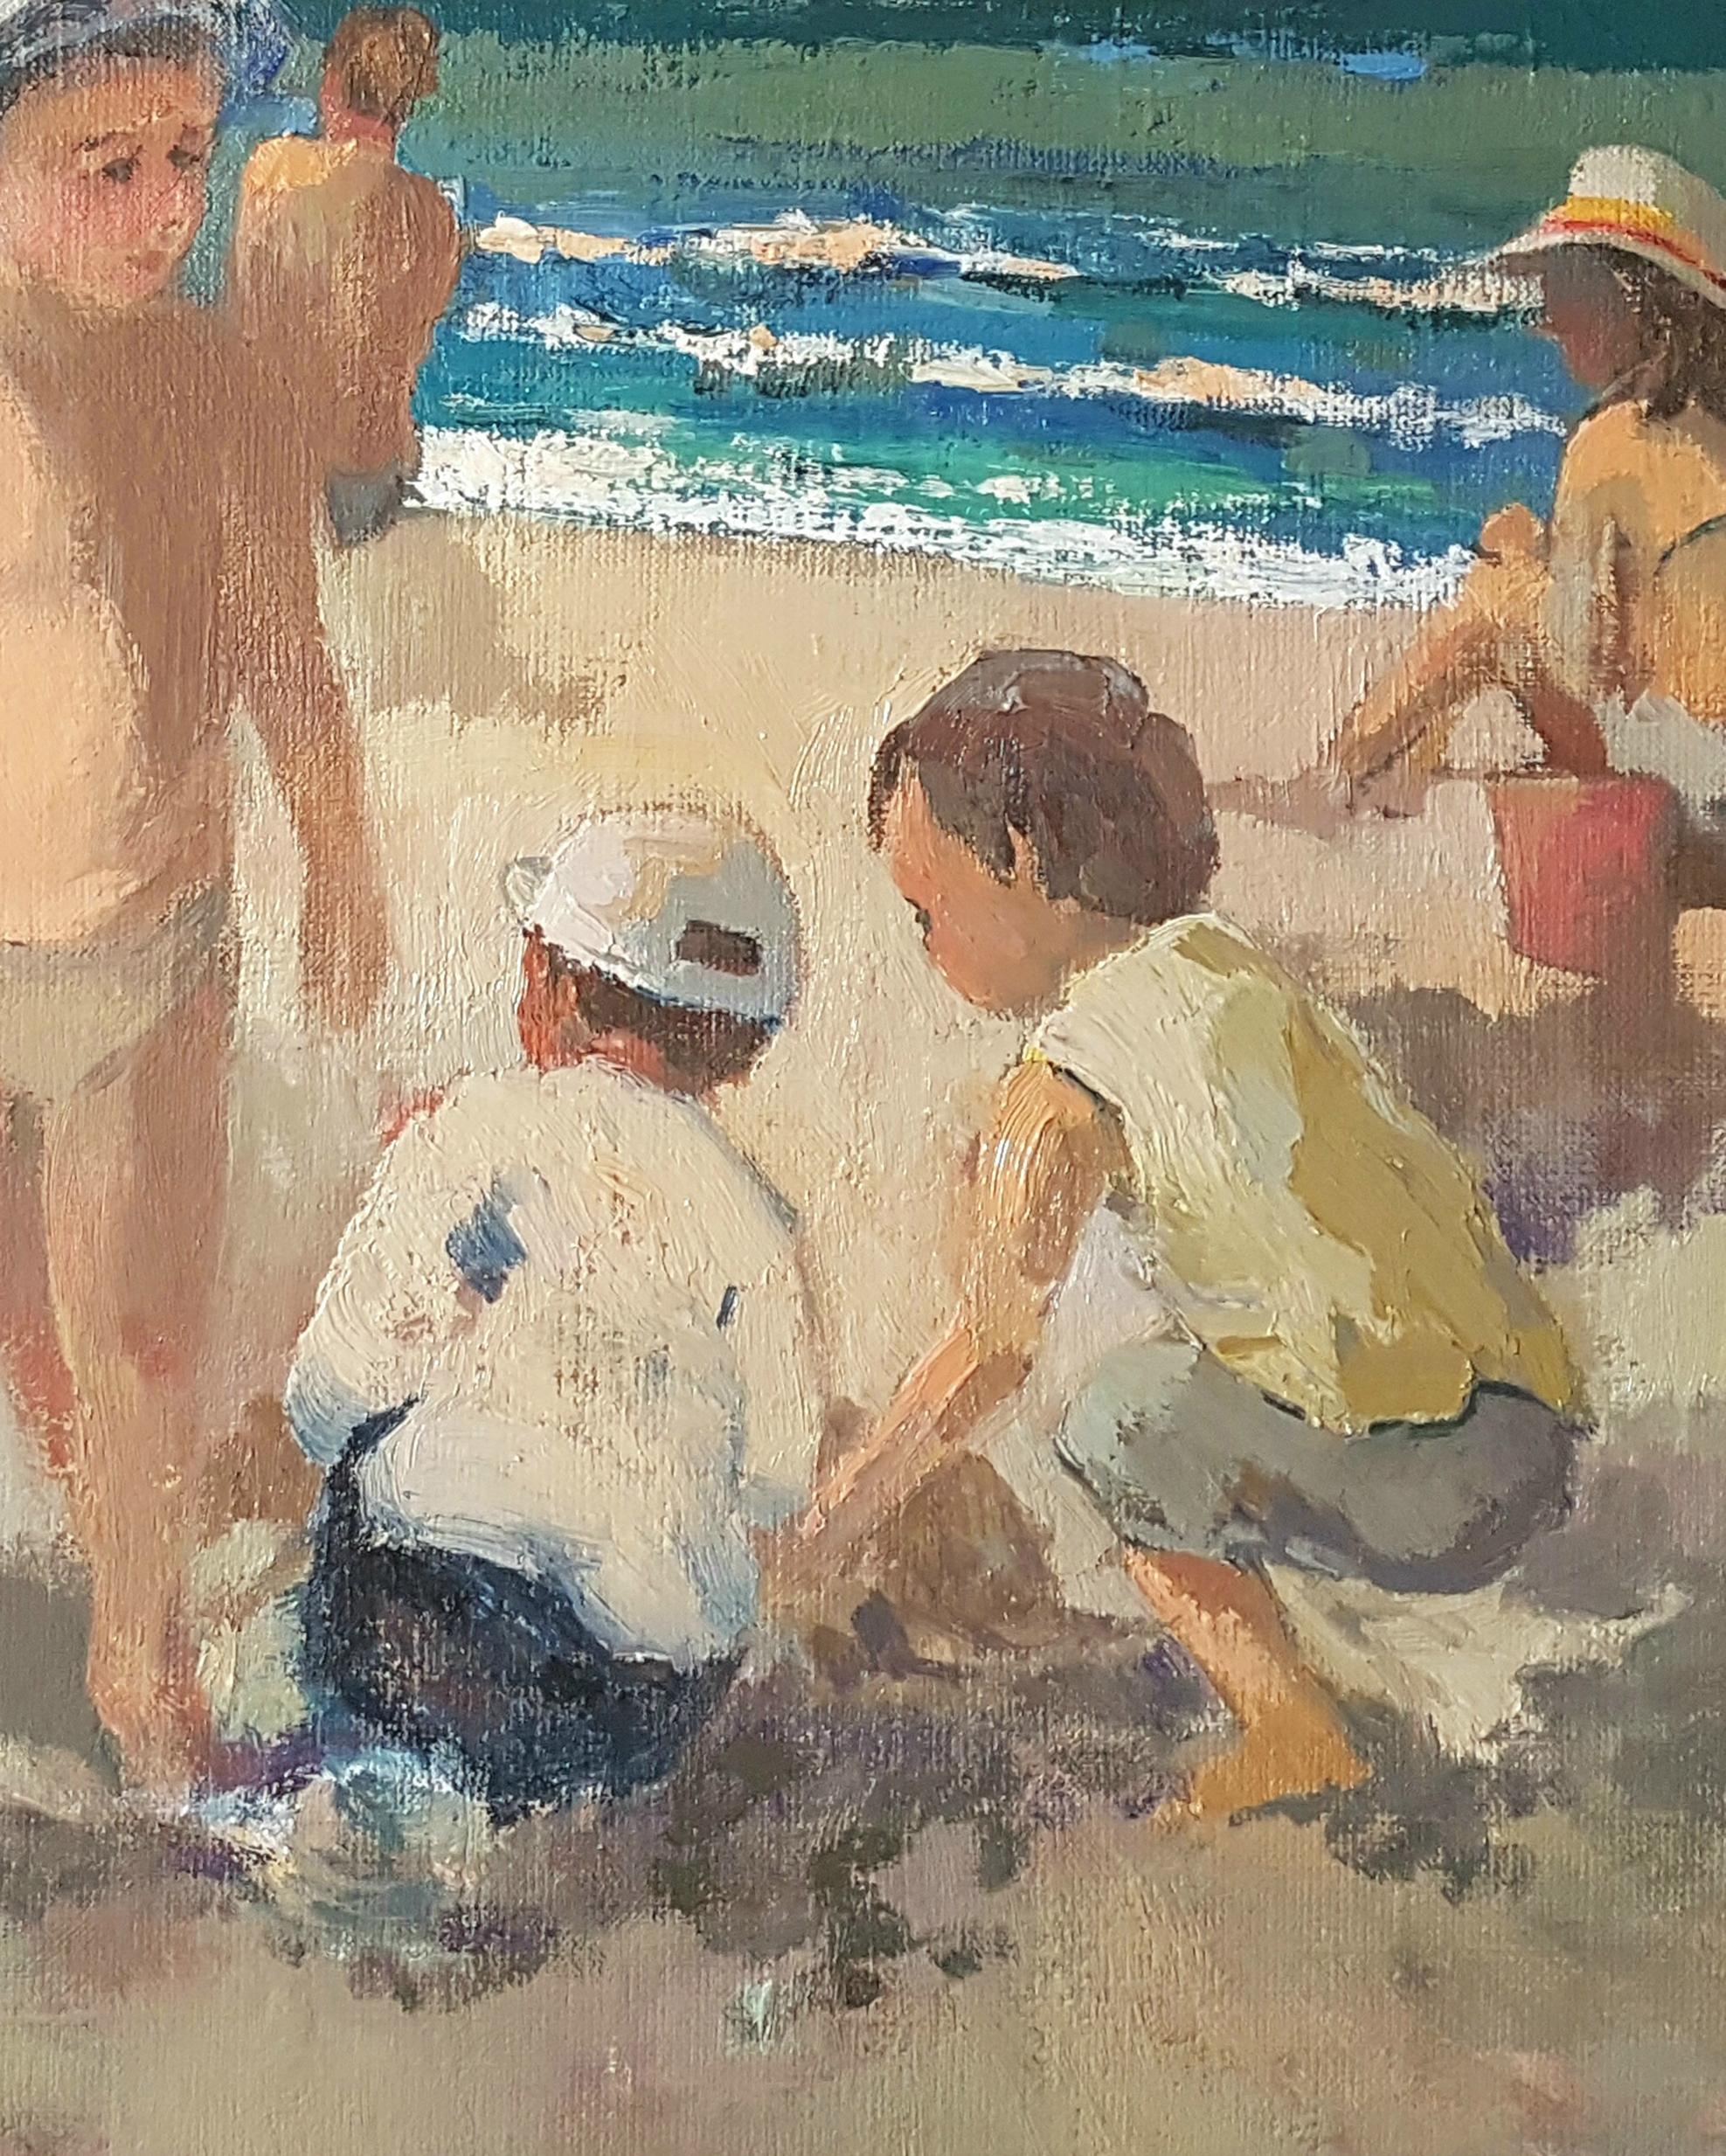 Playing with Sand, Figurative, Coastal, Original oil Painting, One of a Kind - Brown Landscape Painting by Ara H. Hakobyan